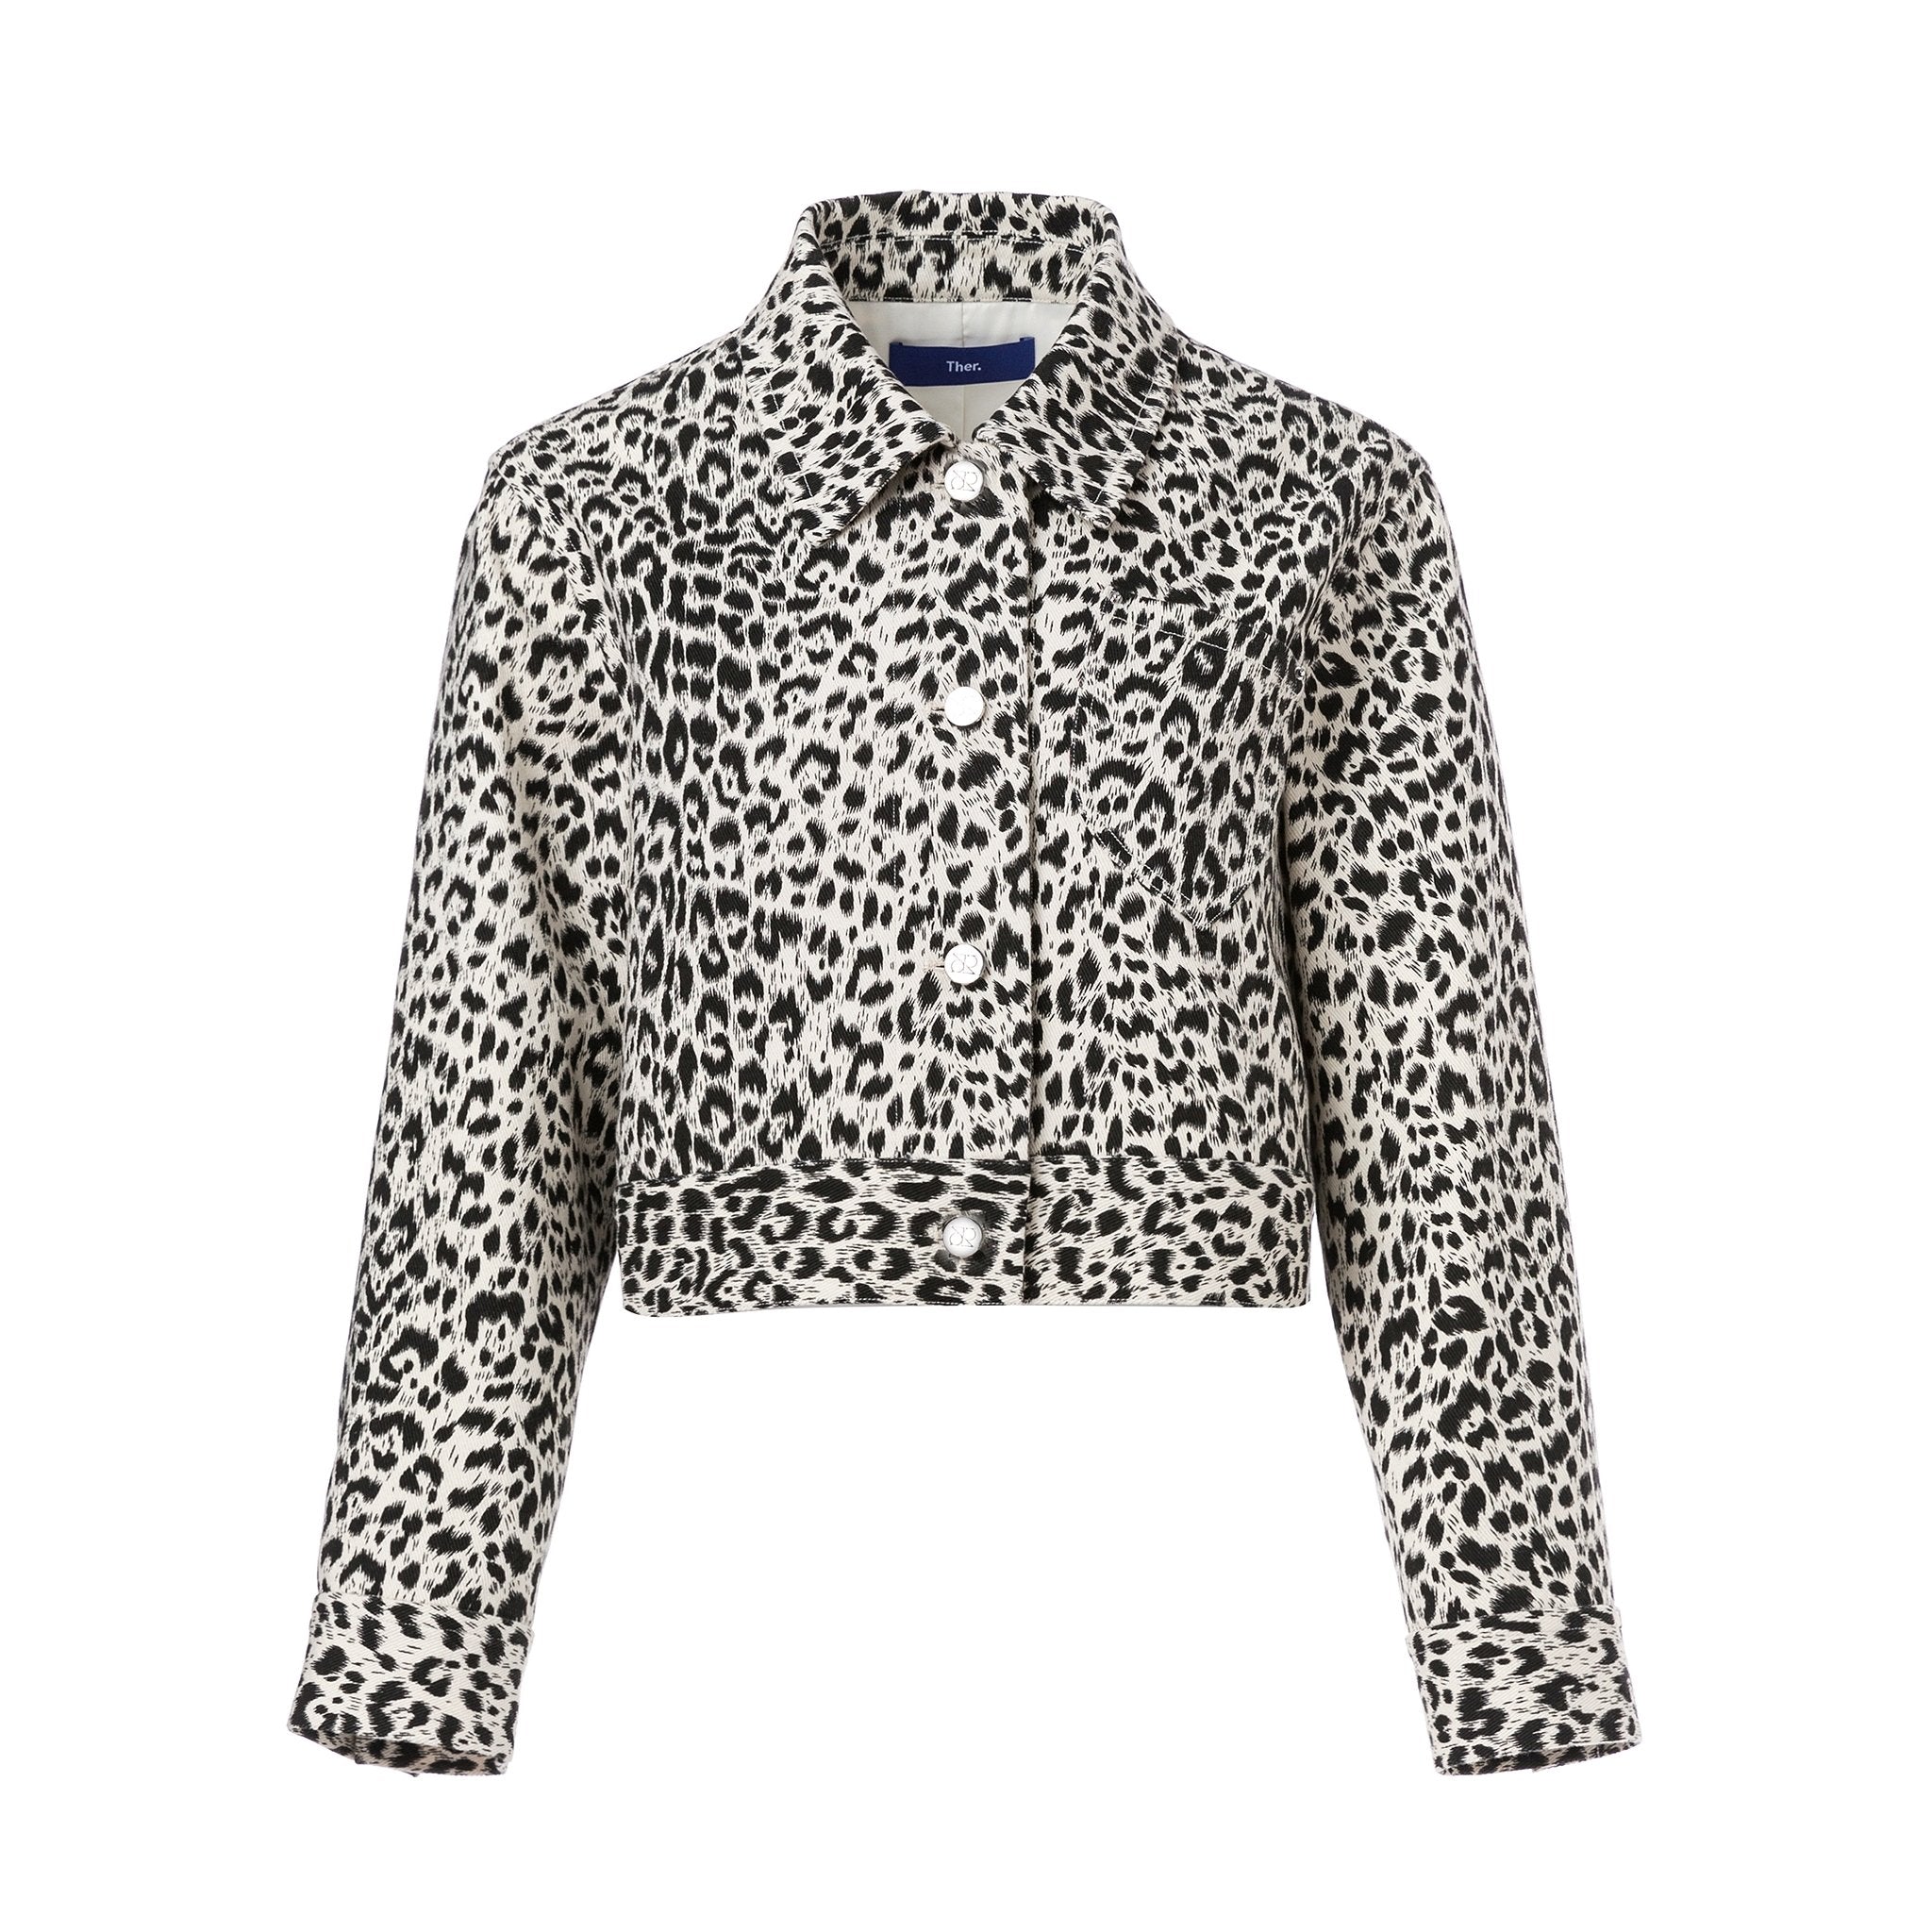 Ther. Leopard Print Denim Short Jacket | MADA IN CHINA